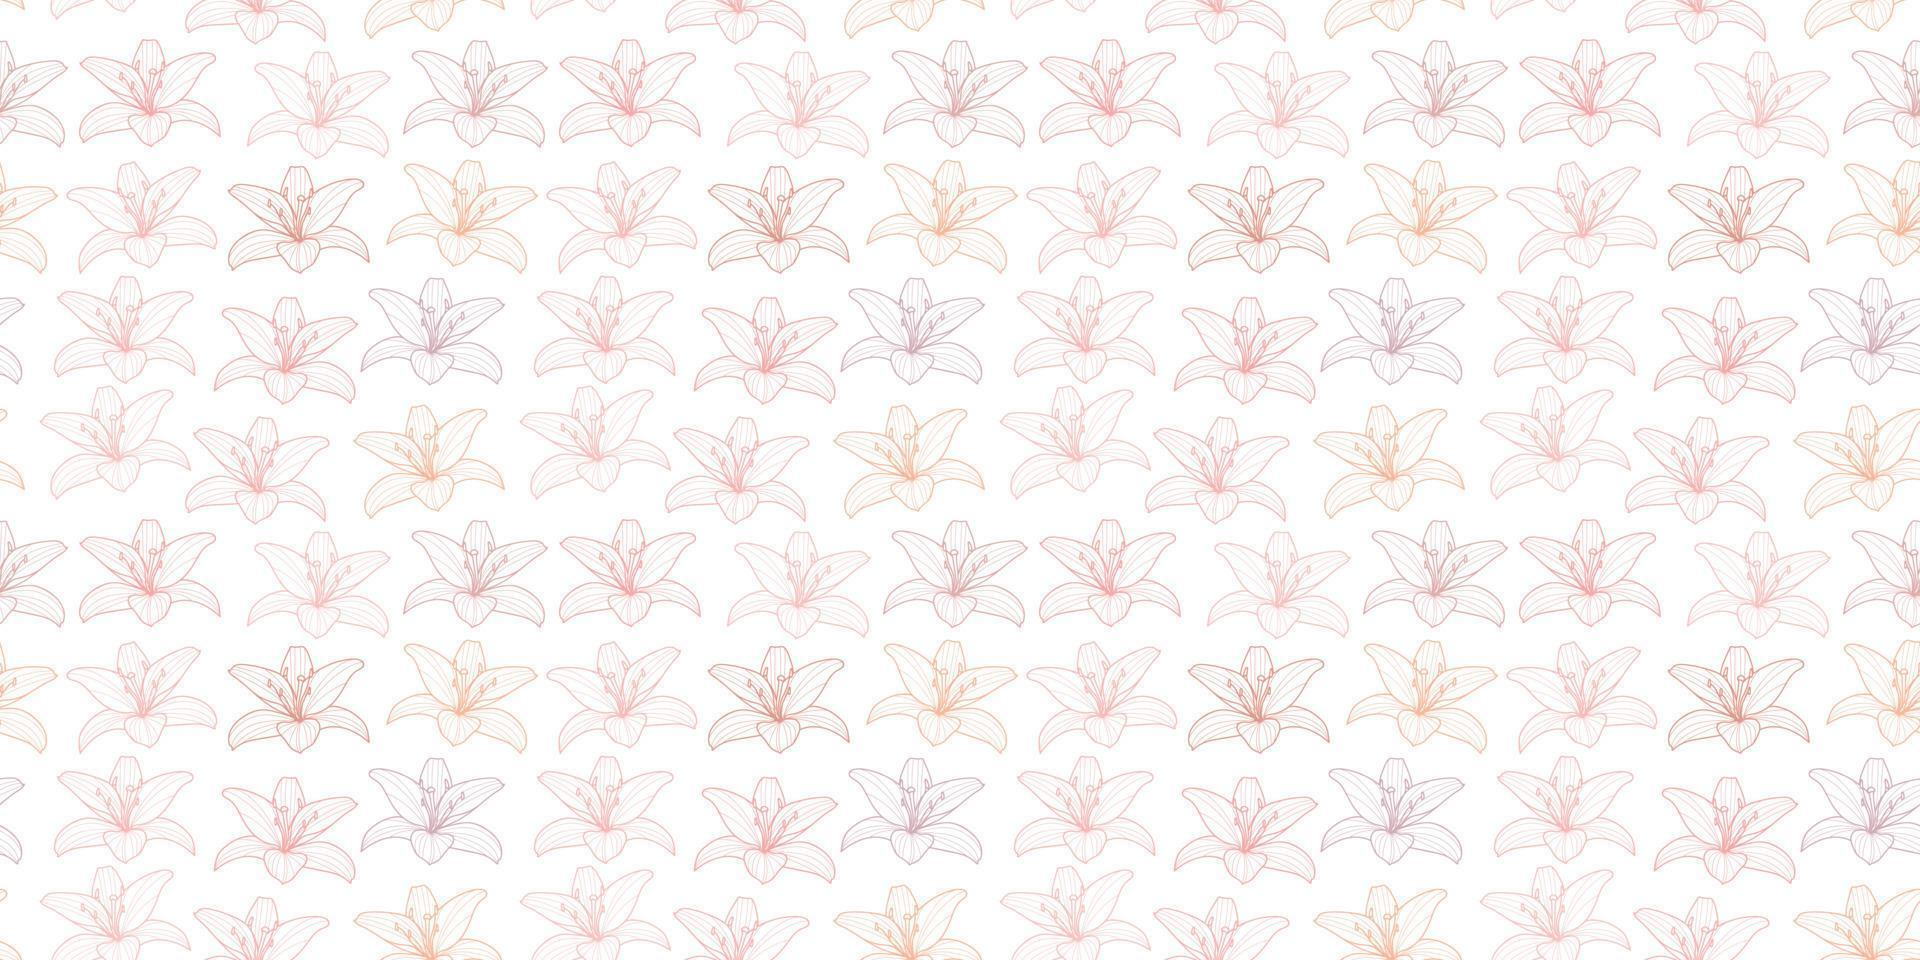 Pastel floral pattern, lilies repeat pattern vector background